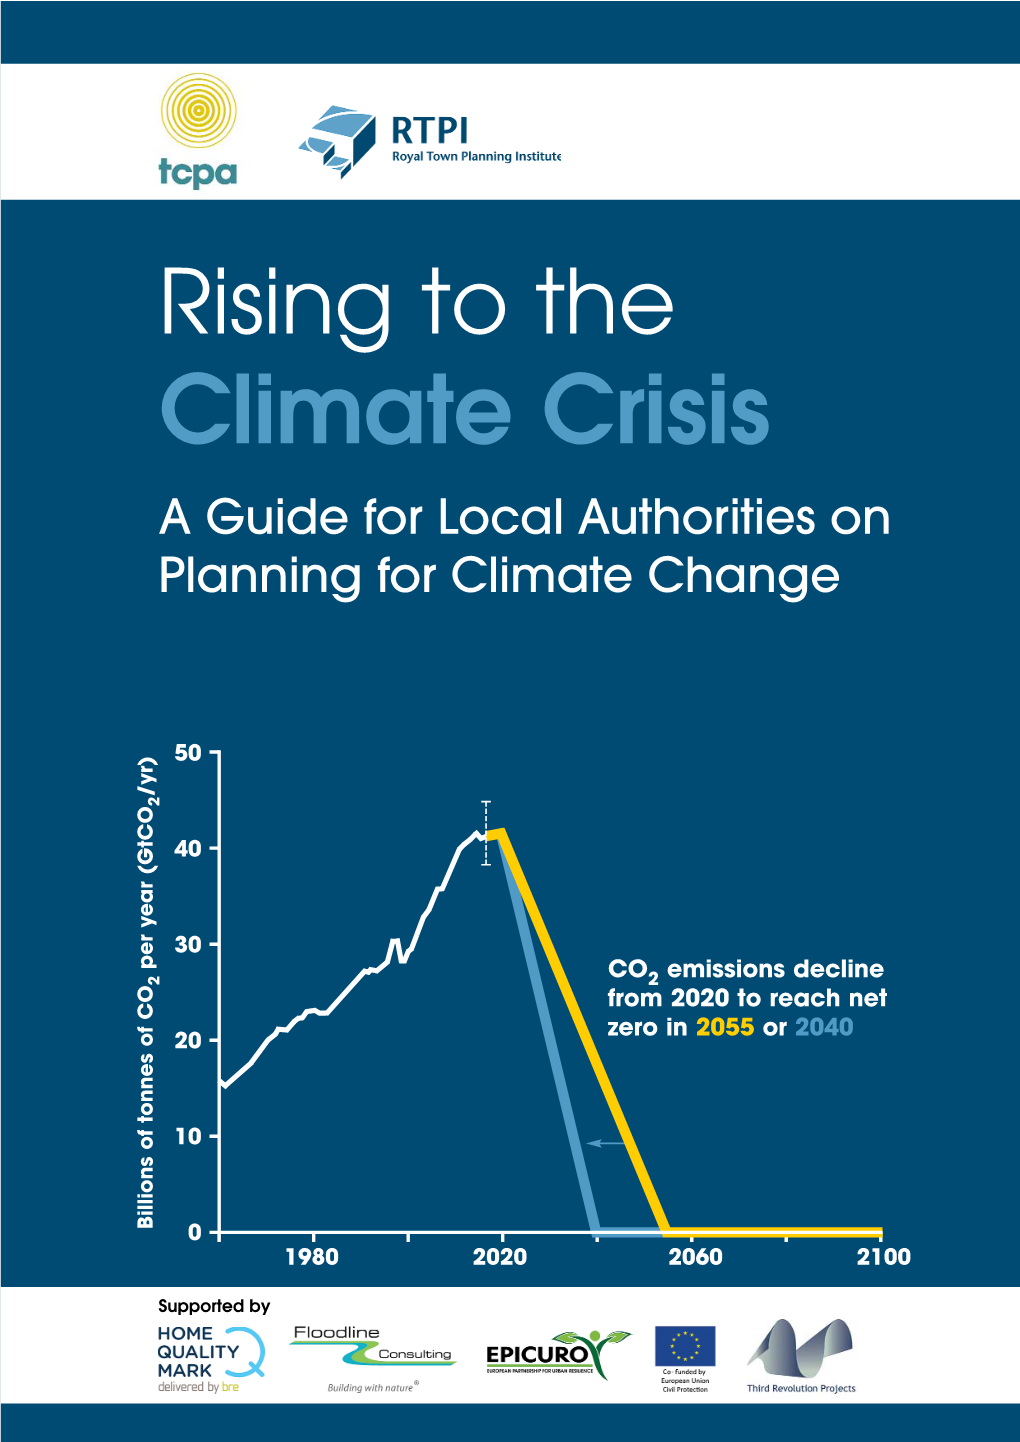 Rising to the Climate Crisis – a Guide for Local Authorities on Planning for Climate Change © TCPA